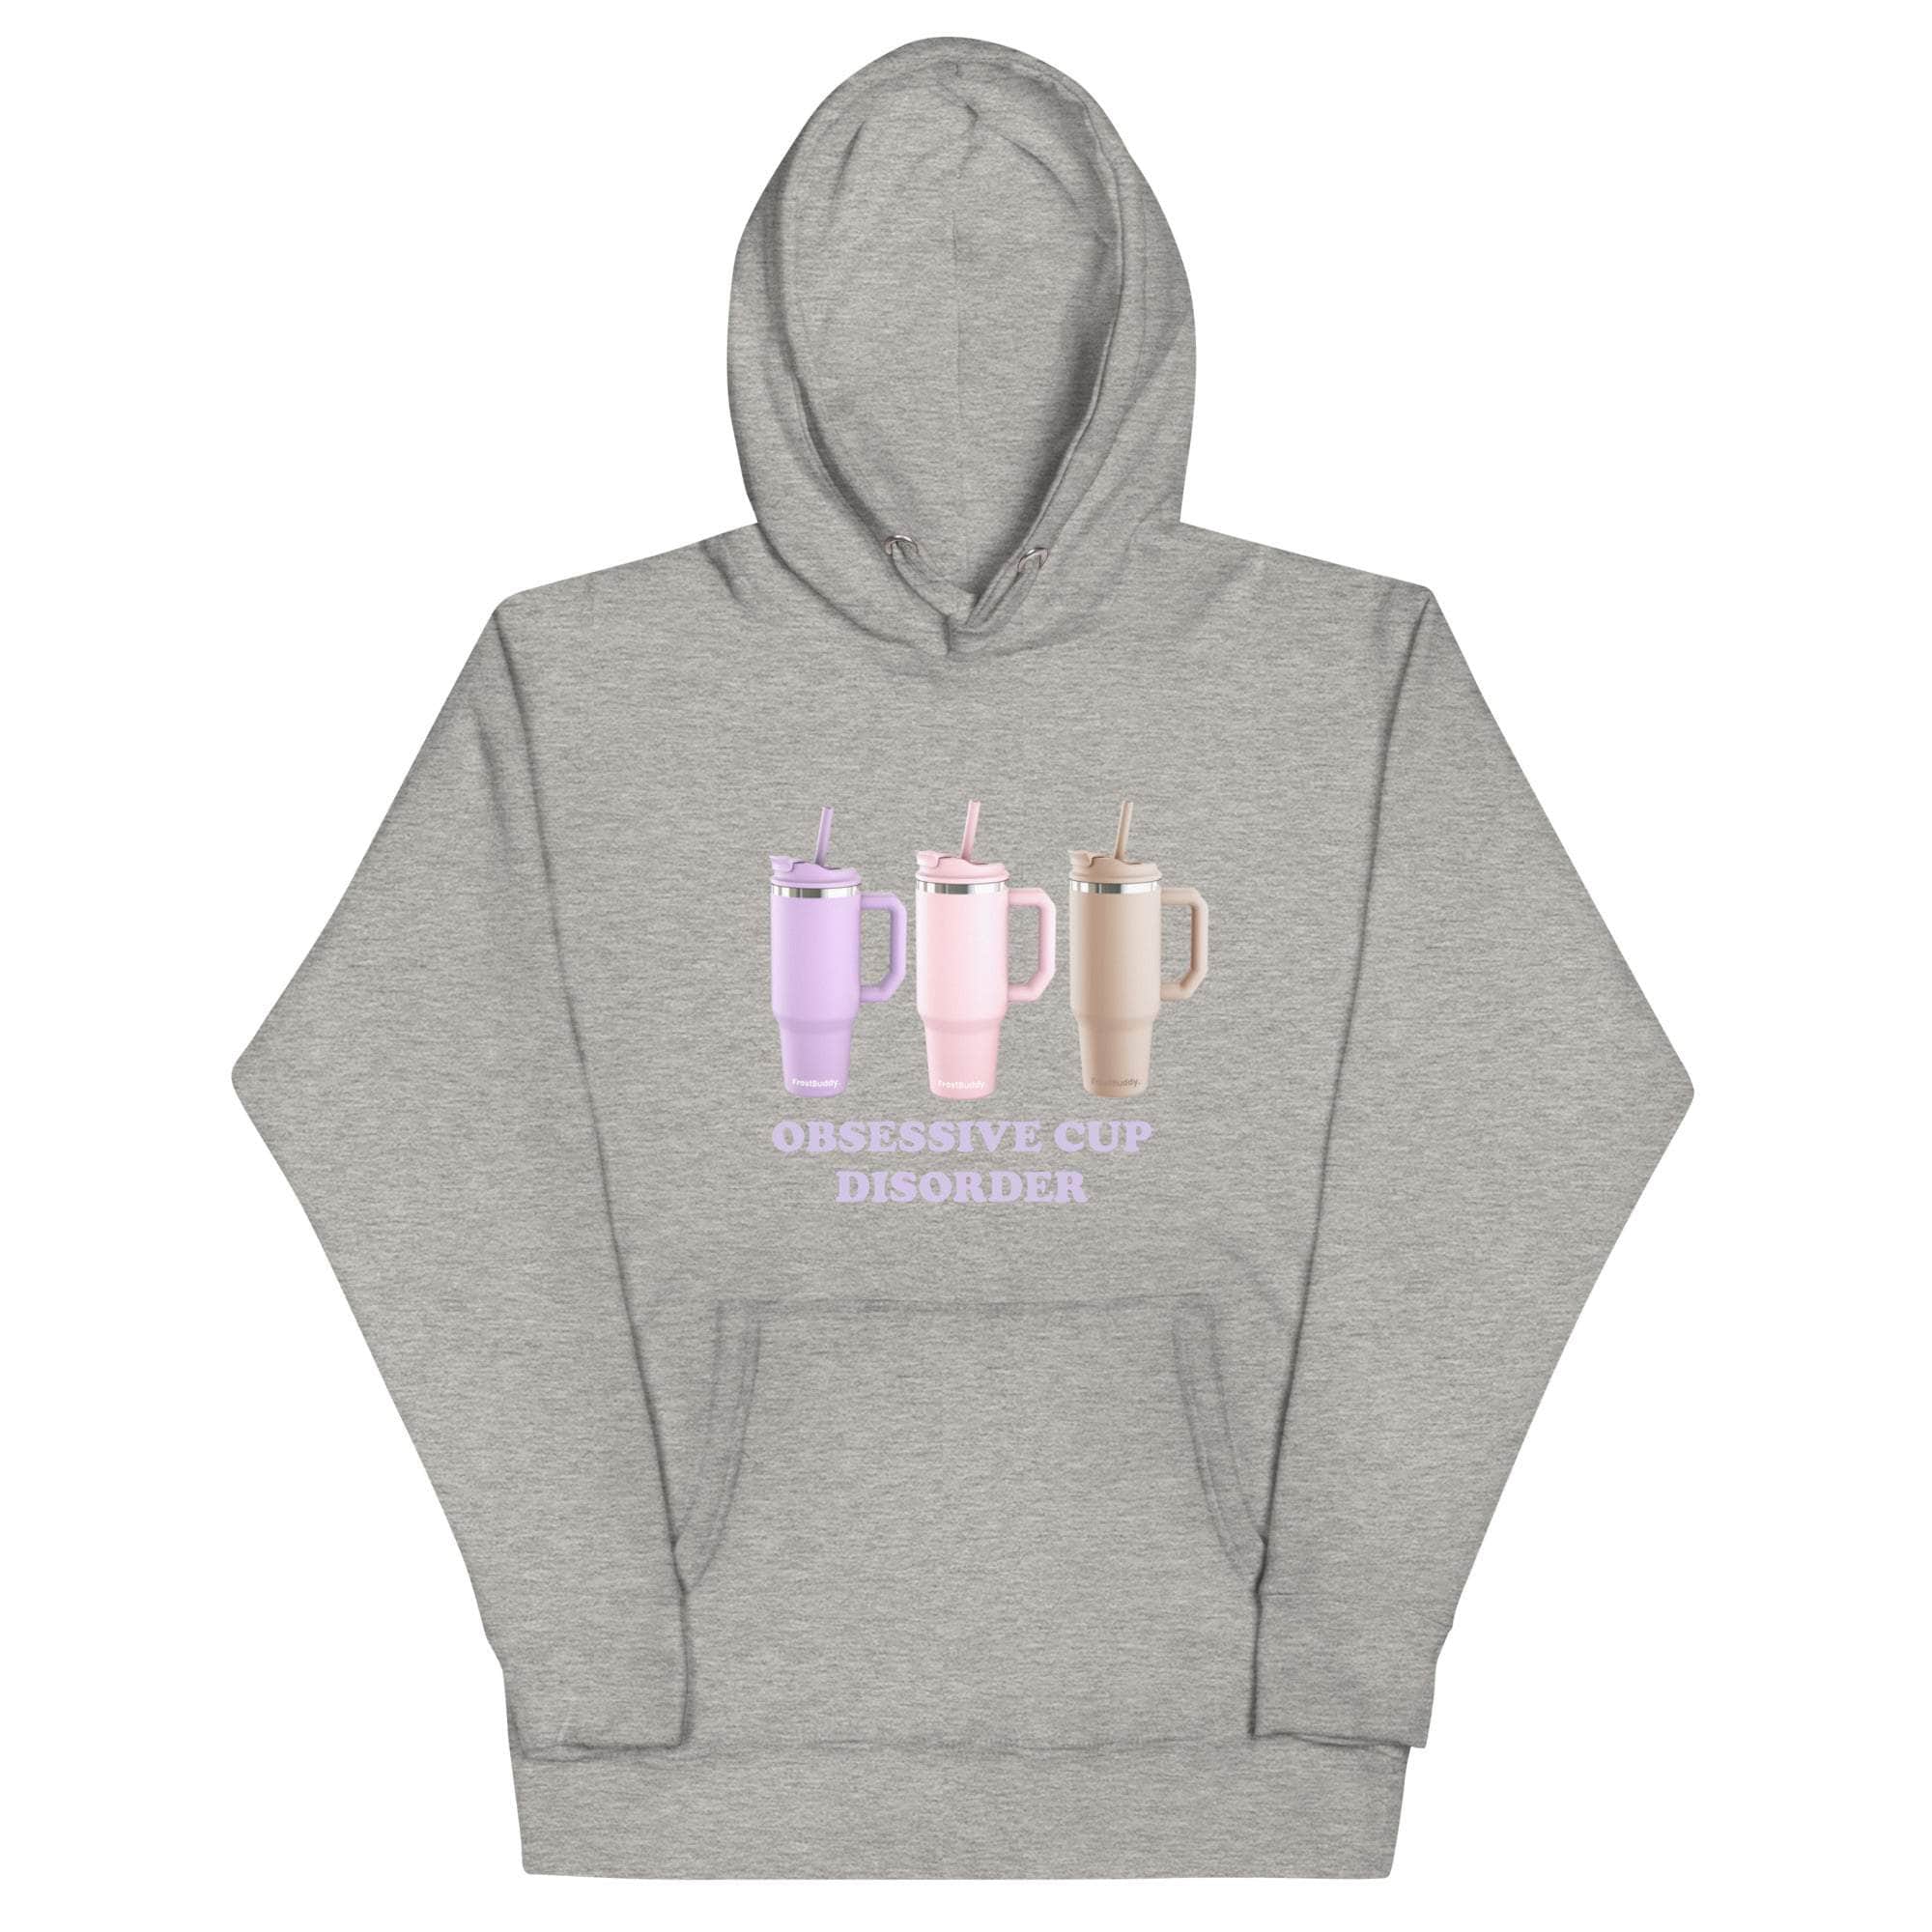 Frost Buddy  Carbon Grey / S Cup Disorder Unisex Hoodie